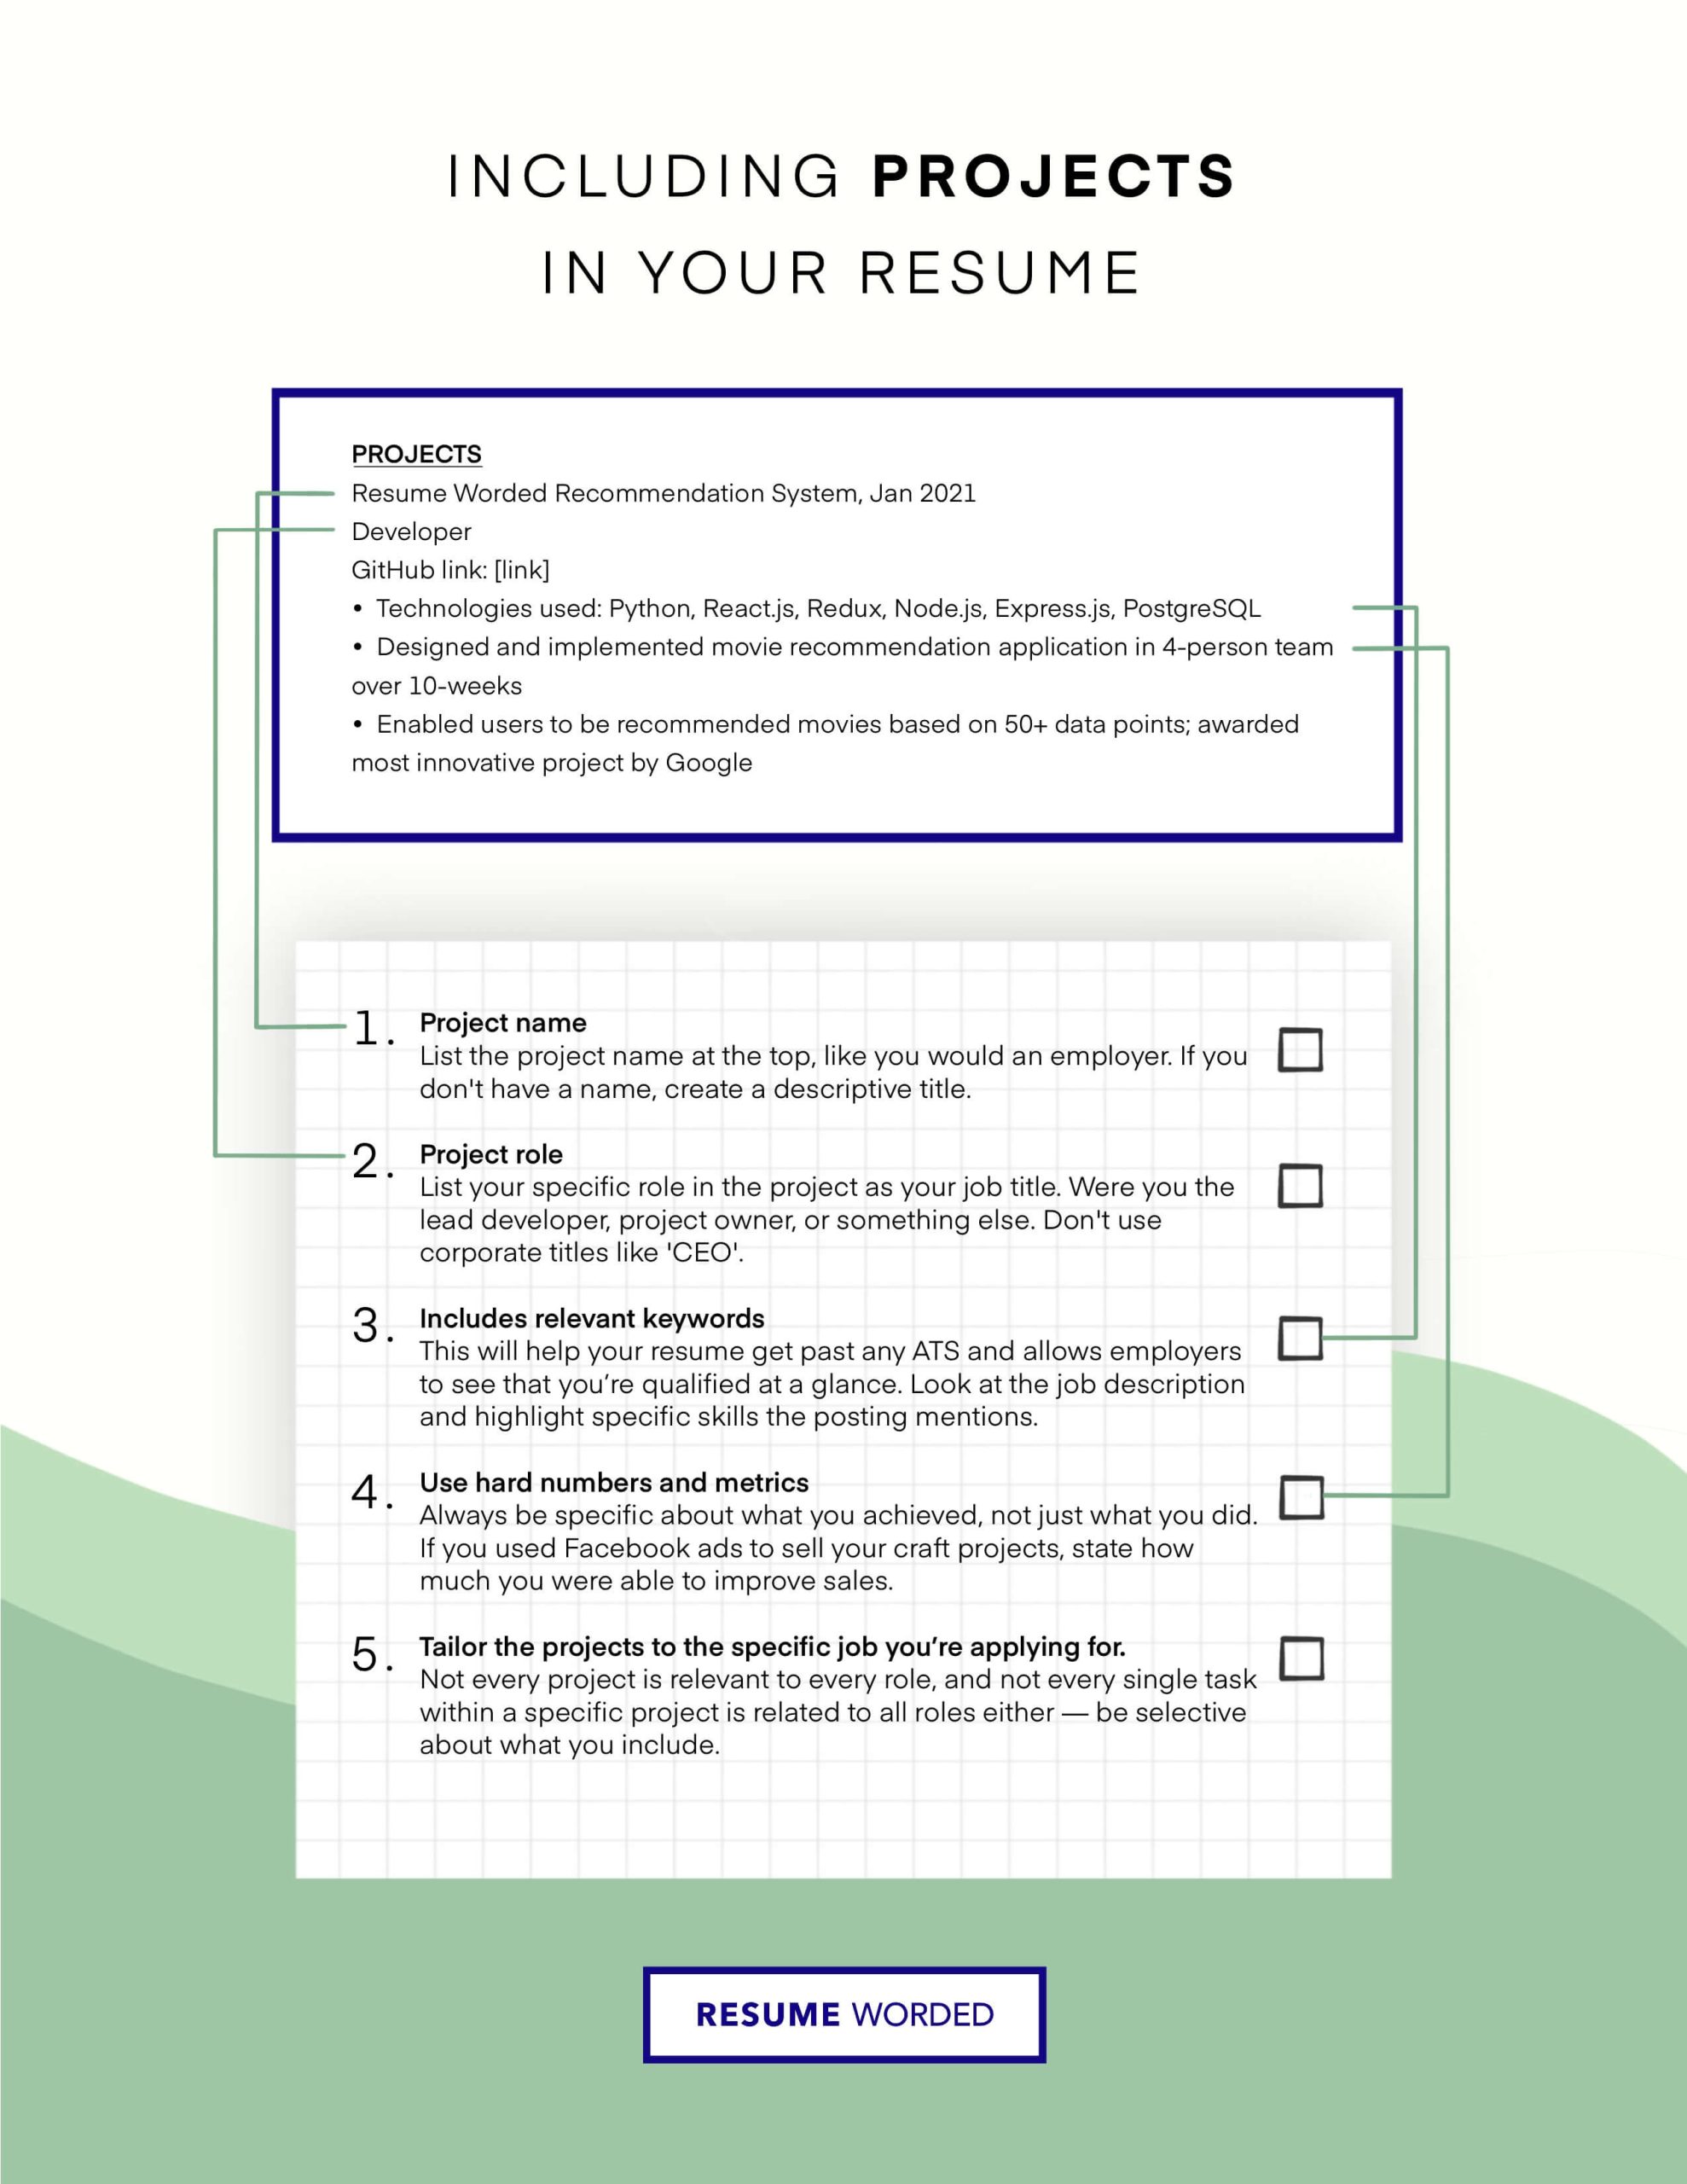 Sample Resume after 10 Year Break How to List Gaps On A Resume (without Making It A Big Deal)